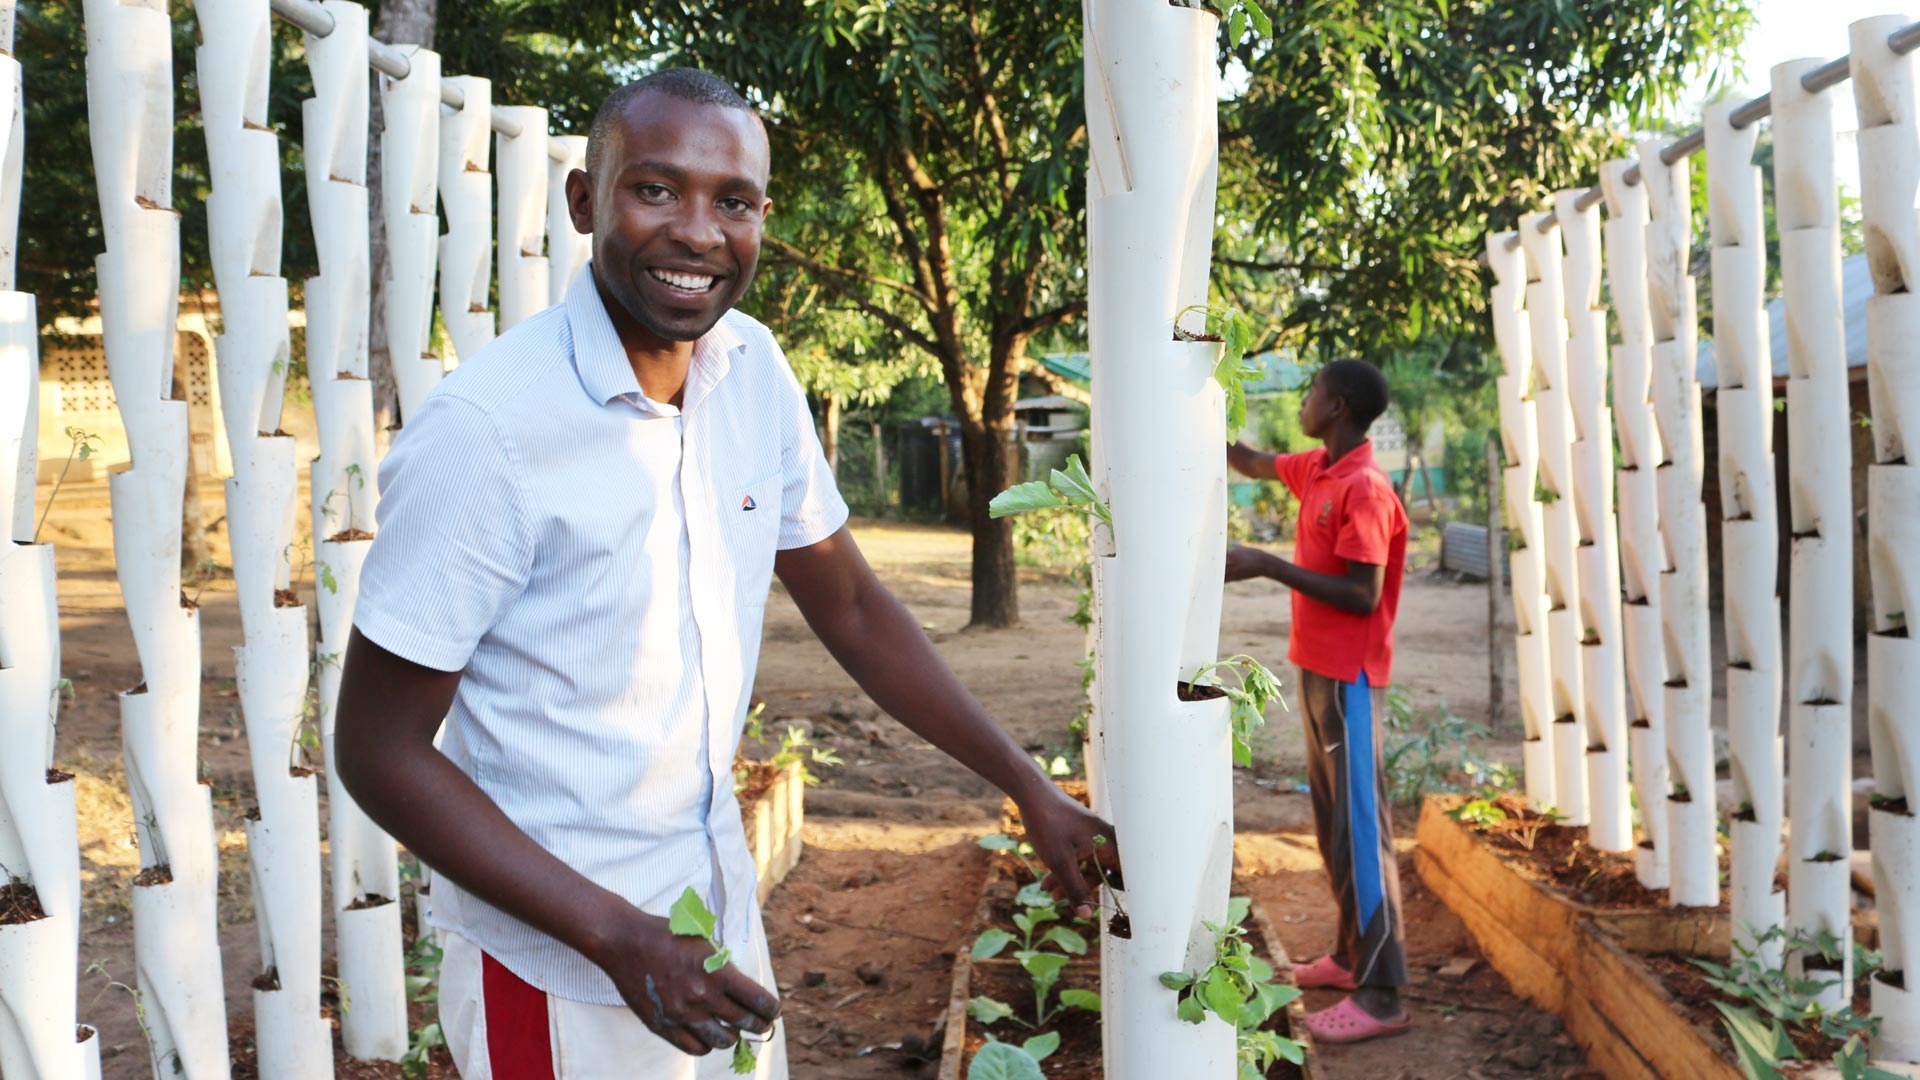 A young Kenyan man laughingly works in a vertical fruit and vegetable garden.